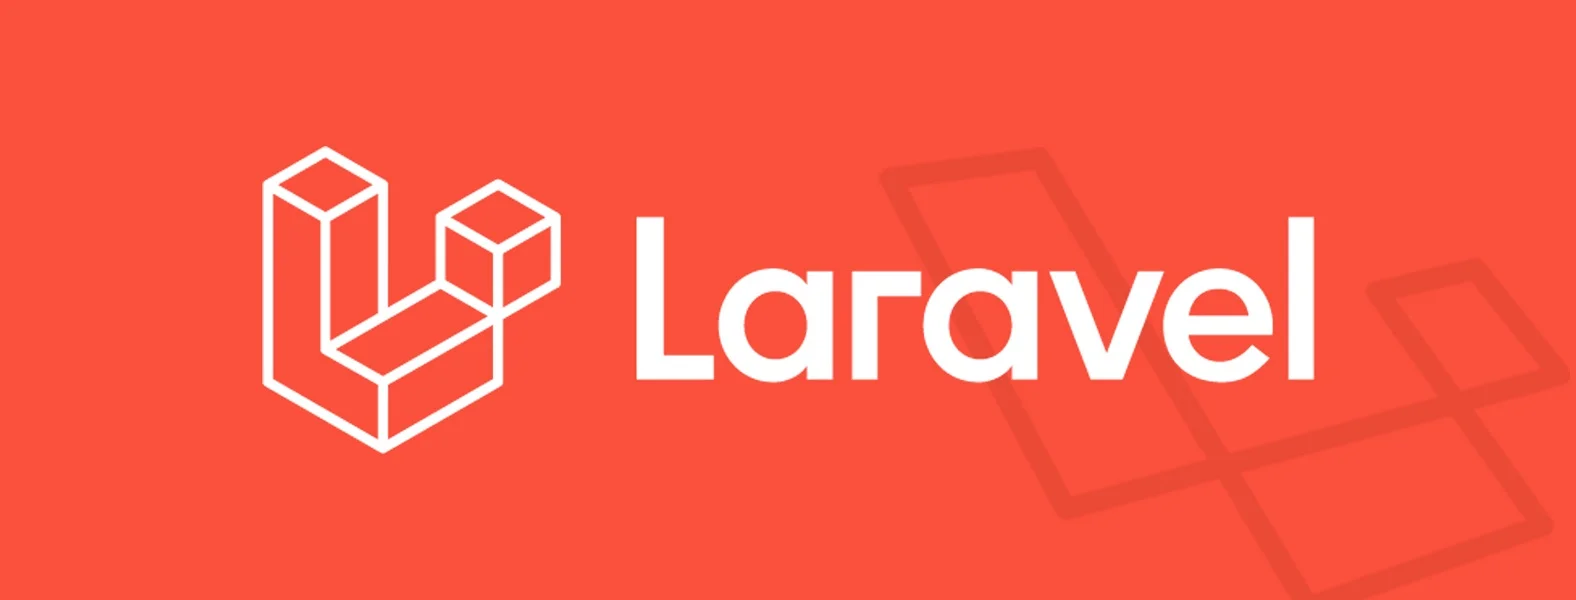 Laravel Redesign - A New and  beautiful Design of Laravel